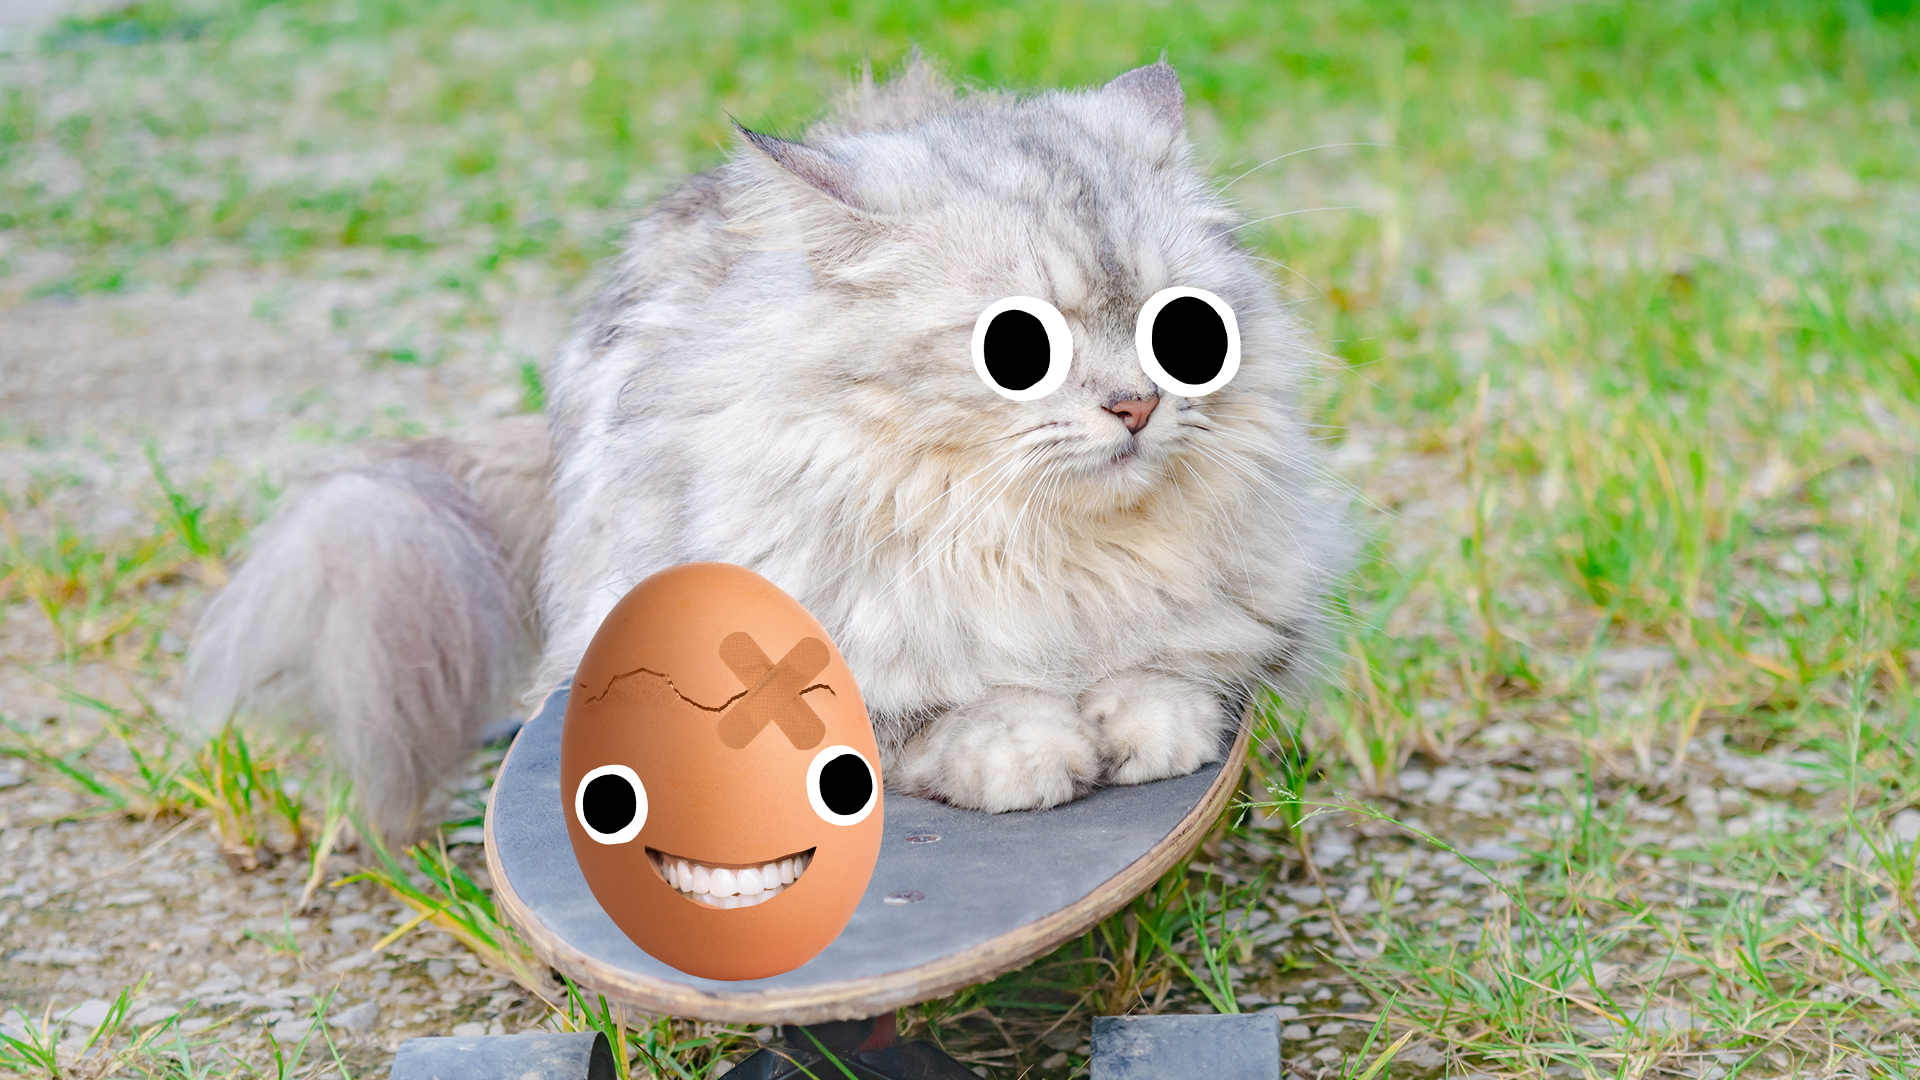 Cat on skateboard with egg